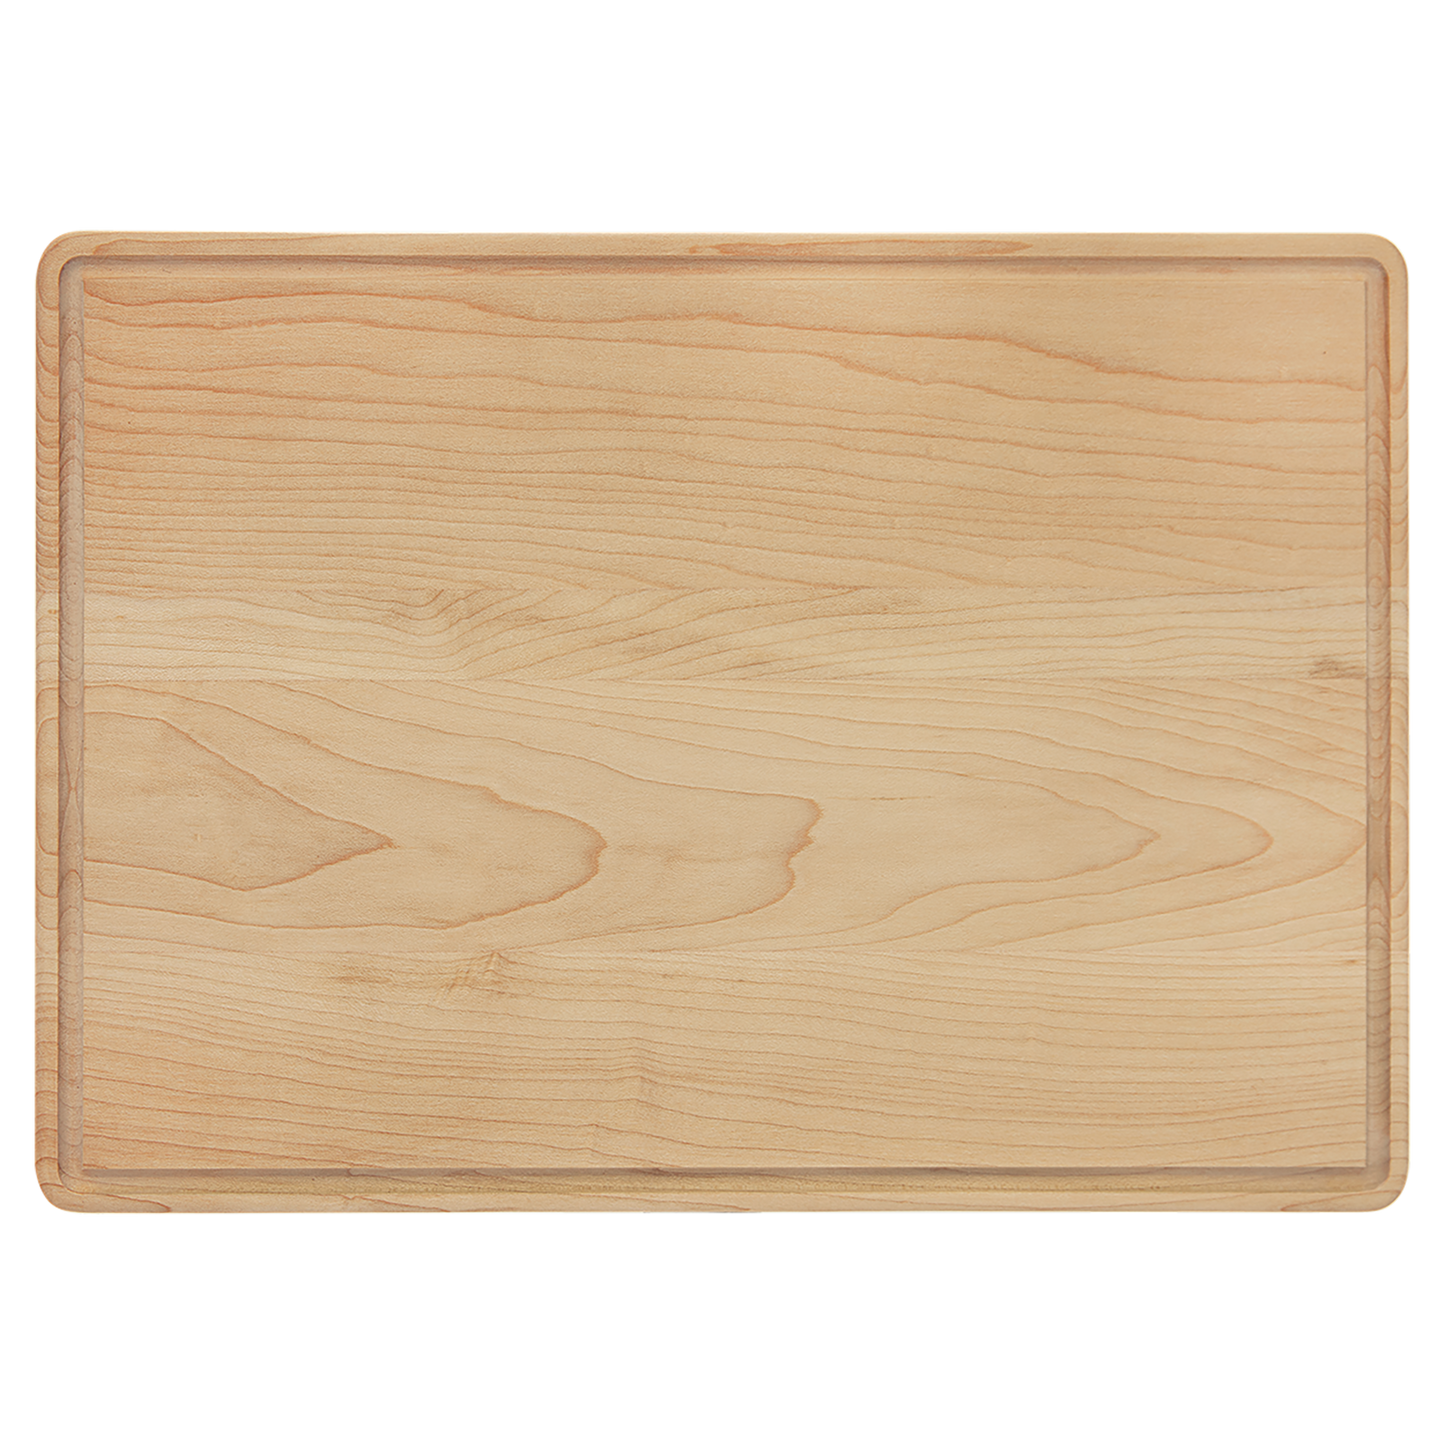 13 3/4" x 9 3/4" Maple Cutting Board with Drip Ring